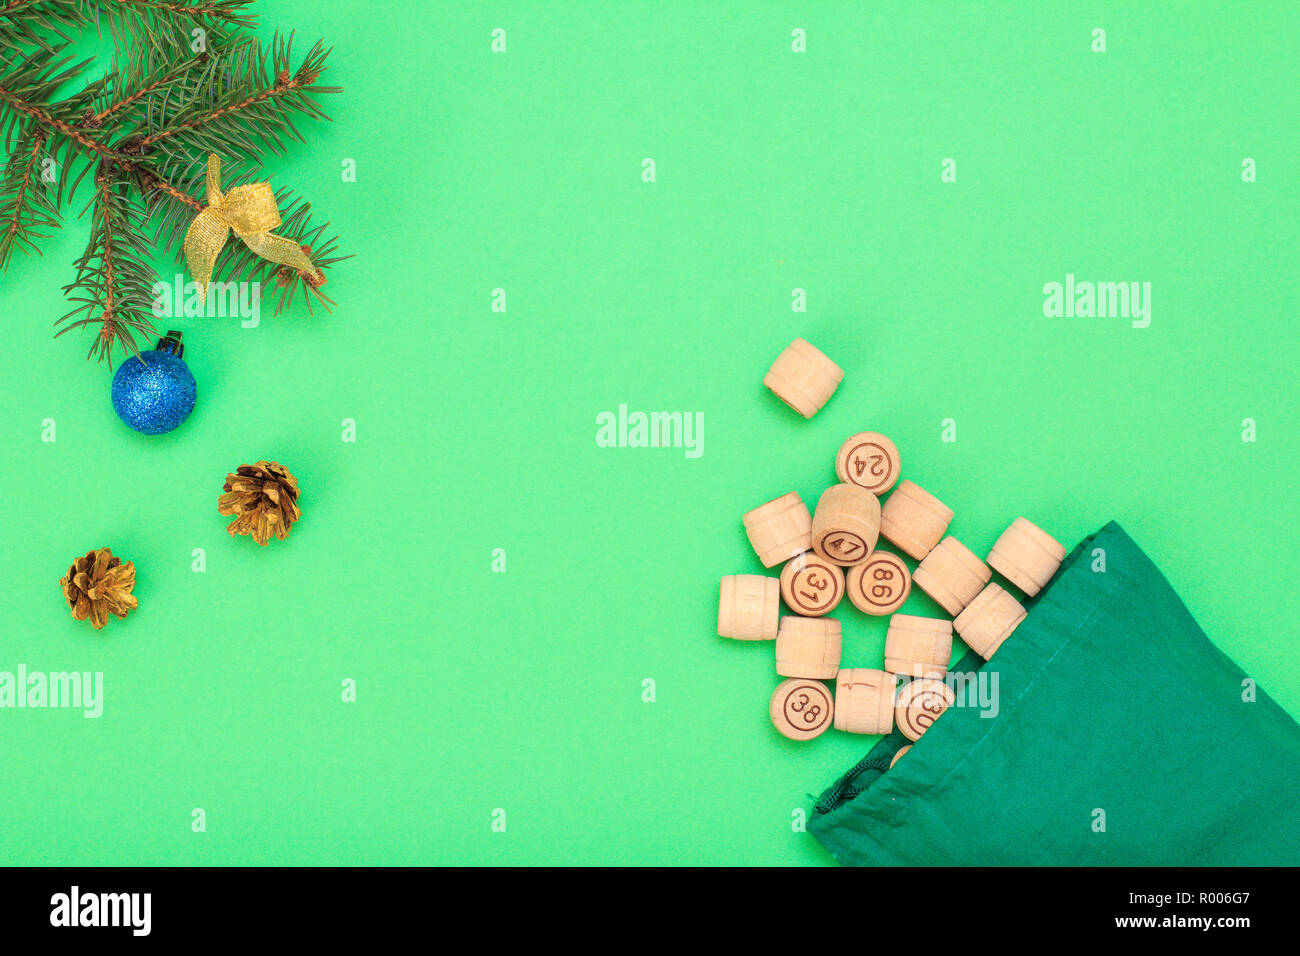 Board game lotto. Wooden lotto barrels with bag, Christmas fir tree branches, cones and toy ball on green background. Top view Stock Photo